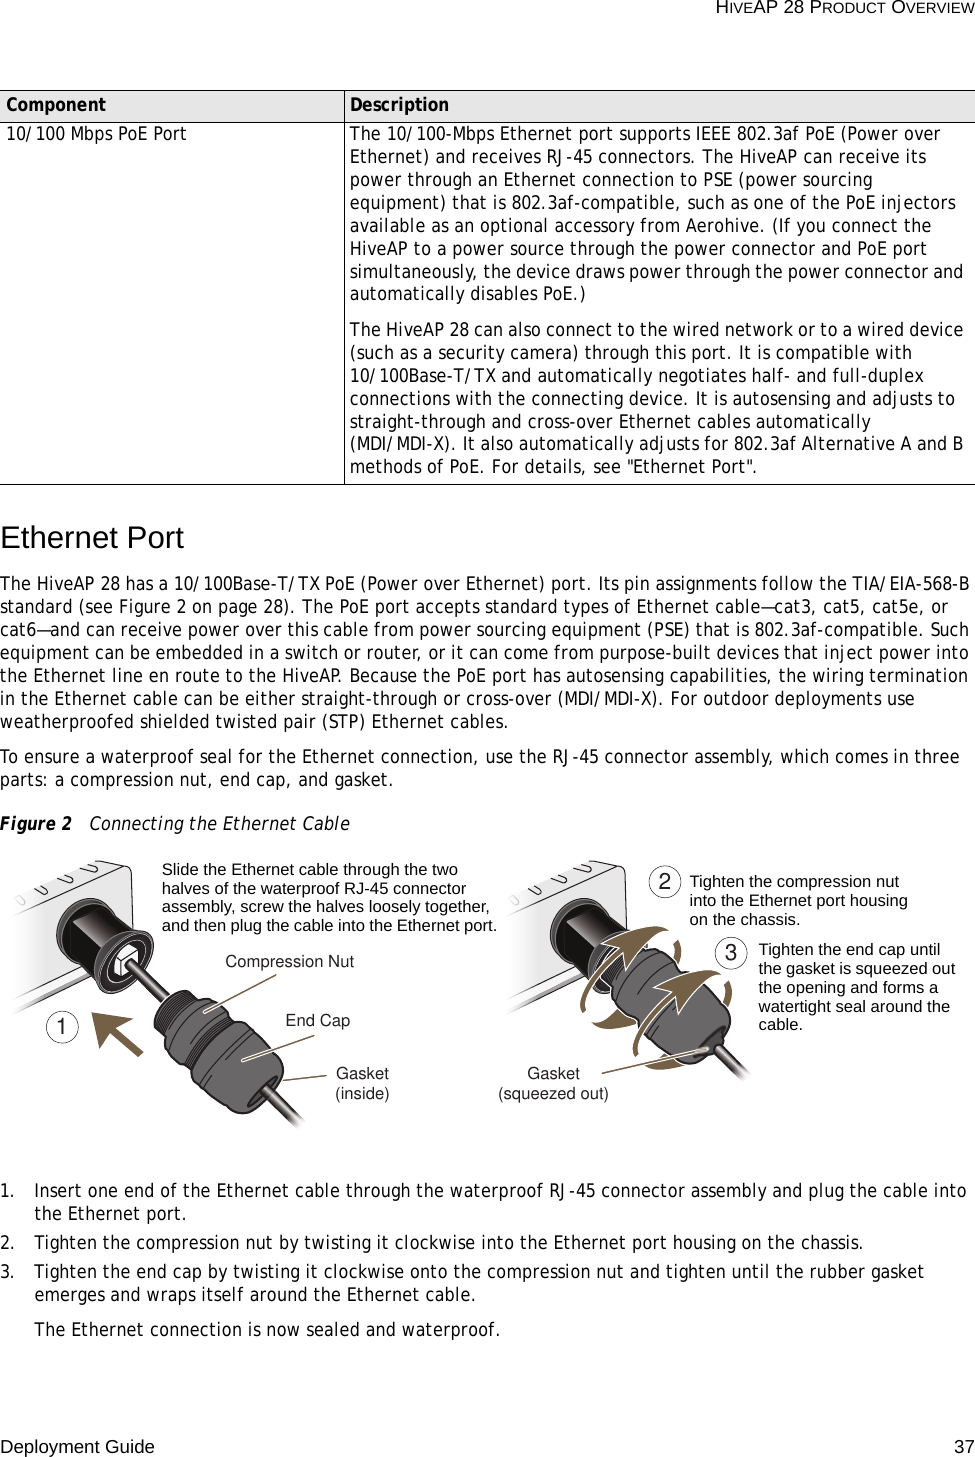 Deployment Guide 37 HIVEAP 28 PRODUCT OVERVIEWEthernet PortThe HiveAP 28 has a 10/100Base-T/TX PoE (Power over Ethernet) port. Its pin assignments follow the TIA/EIA-568-B standard (see Figure 2 on page 28). The PoE port accepts standard types of Ethernet cable—cat3, cat5, cat5e, or cat6—and can receive power over this cable from power sourcing equipment (PSE) that is 802.3af-compatible. Such equipment can be embedded in a switch or router, or it can come from purpose-built devices that inject power into the Ethernet line en route to the HiveAP. Because the PoE port has autosensing capabilities, the wiring termination in the Ethernet cable can be either straight-through or cross-over (MDI/MDI-X). For outdoor deployments use weatherproofed shielded twisted pair (STP) Ethernet cables.To ensure a waterproof seal for the Ethernet connection, use the RJ-45 connector assembly, which comes in three parts: a compression nut, end cap, and gasket.Figure 2  Connecting the Ethernet Cable1. Insert one end of the Ethernet cable through the waterproof RJ-45 connector assembly and plug the cable into the Ethernet port.2. Tighten the compression nut by twisting it clockwise into the Ethernet port housing on the chassis.3. Tighten the end cap by twisting it clockwise onto the compression nut and tighten until the rubber gasket emerges and wraps itself around the Ethernet cable.The Ethernet connection is now sealed and waterproof.10/100 Mbps PoE Port The 10/100-Mbps Ethernet port supports IEEE 802.3af PoE (Power over Ethernet) and receives RJ-45 connectors. The HiveAP can receive its power through an Ethernet connection to PSE (power sourcing equipment) that is 802.3af-compatible, such as one of the PoE injectors available as an optional accessory from Aerohive. (If you connect the HiveAP to a power source through the power connector and PoE port simultaneously, the device draws power through the power connector and automatically disables PoE.)The HiveAP 28 can also connect to the wired network or to a wired device (such as a security camera) through this port. It is compatible with 10/100Base-T/TX and automatically negotiates half- and full-duplex connections with the connecting device. It is autosensing and adjusts to straight-through and cross-over Ethernet cables automatically (MDI/MDI-X). It also automatically adjusts for 802.3af Alternative A and B methods of PoE. For details, see &quot;Ethernet Port&quot;.Component Description2Compression NutEnd CapGasket (inside) Gasket (squeezed out)13Slide the Ethernet cable through the two halves of the waterproof RJ-45 connector assembly, screw the halves loosely together, and then plug the cable into the Ethernet port.Tighten the compression nut into the Ethernet port housing on the chassis.Tighten the end cap until the gasket is squeezed out the opening and forms a watertight seal around the cable.